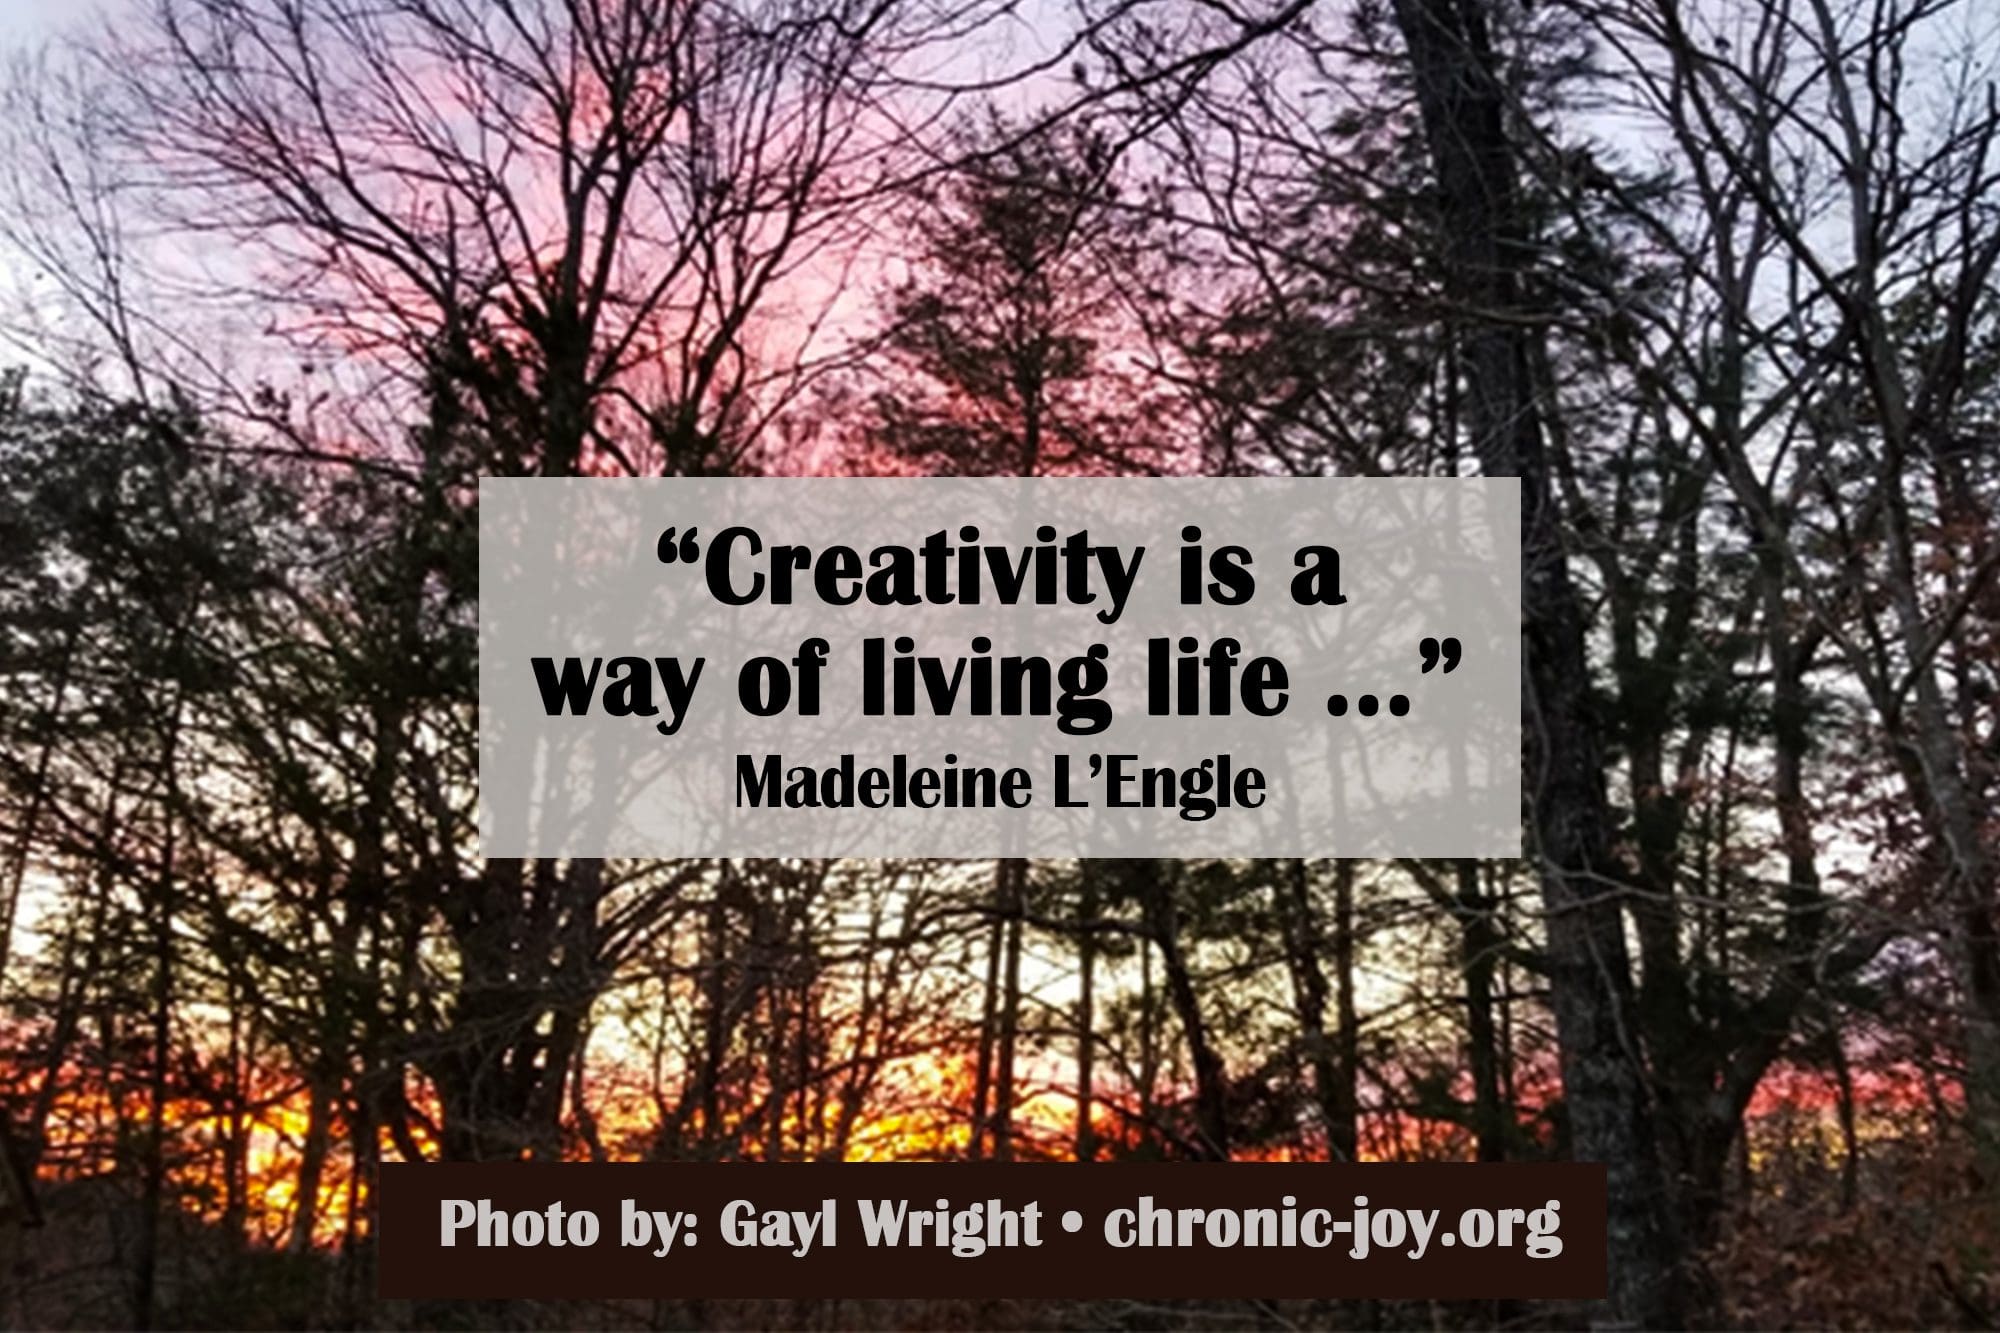 "Creativity is a way of living life..." Madeleine L'Engle